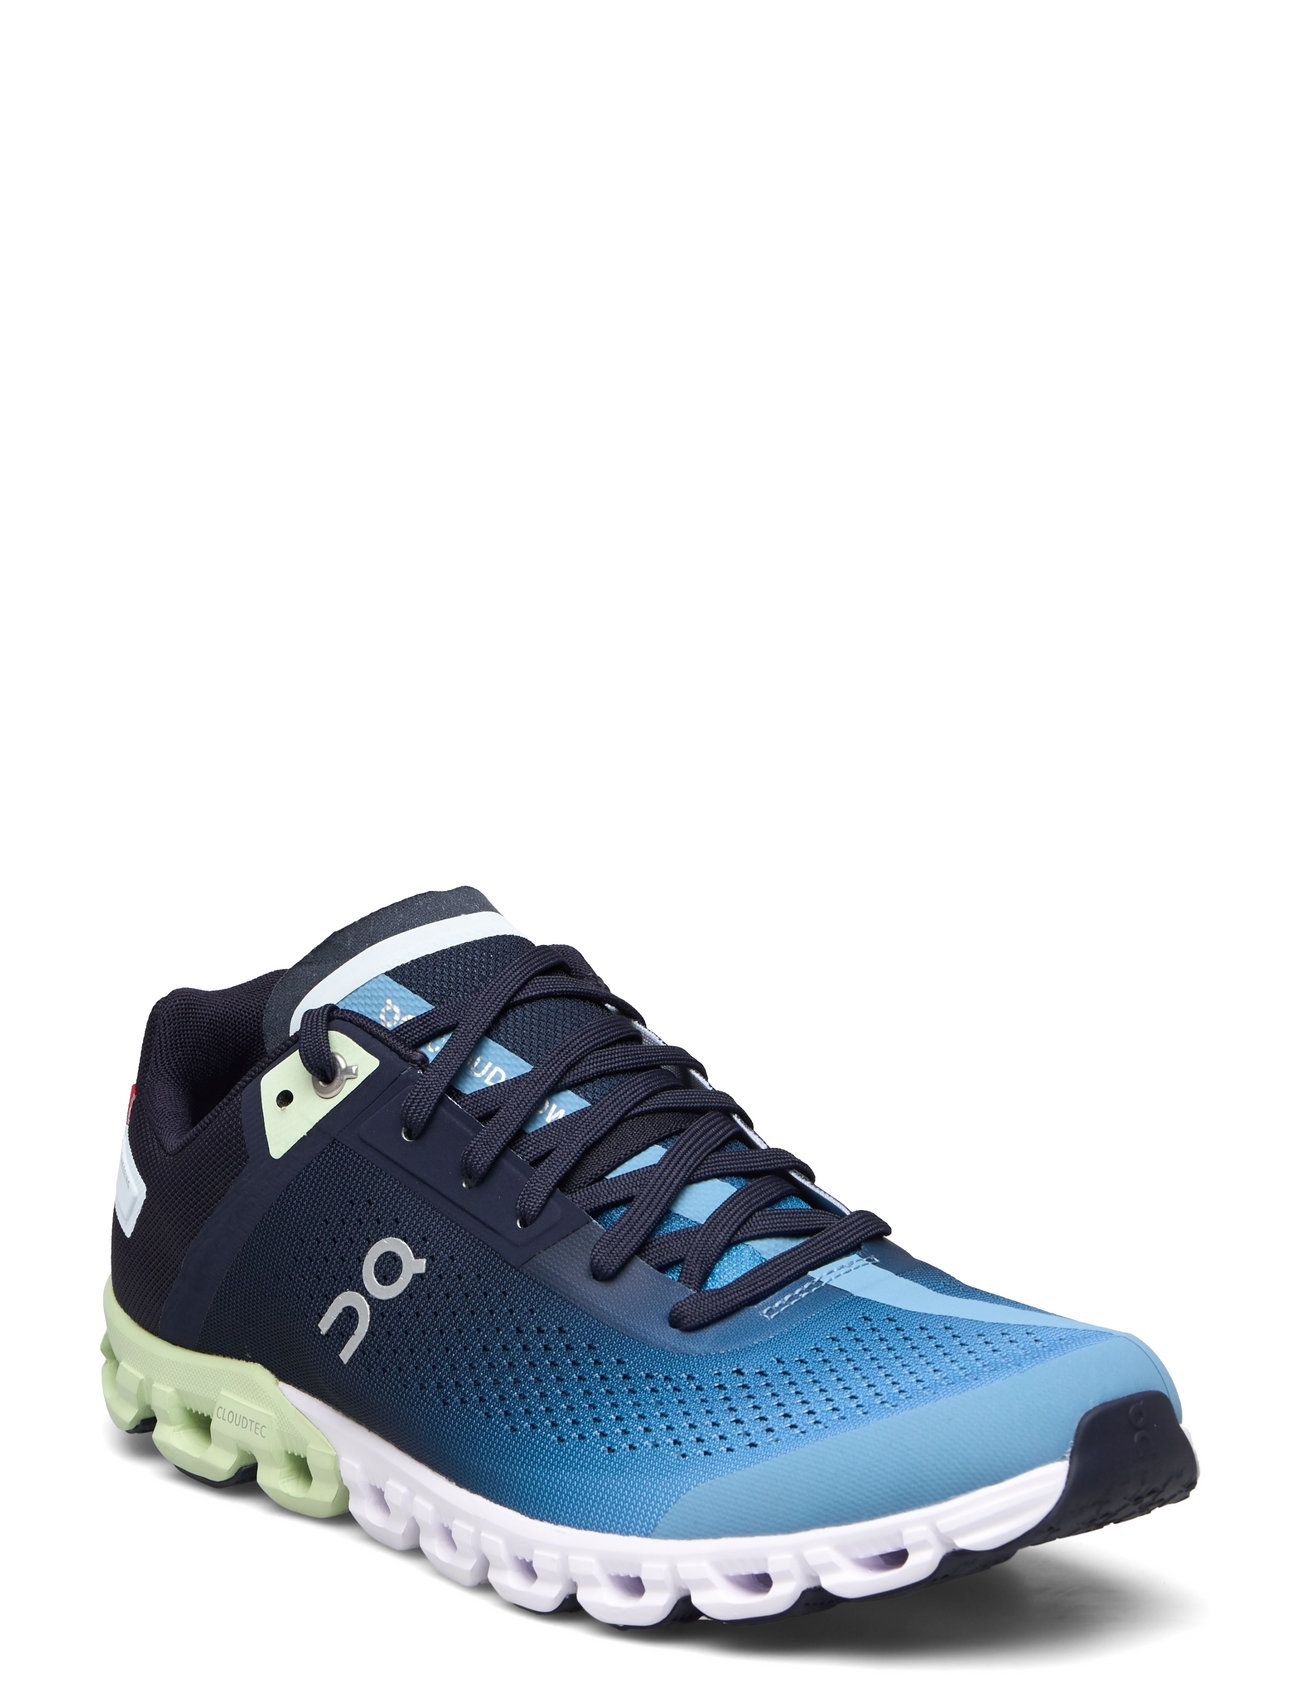 Cloudflow Shoes Sport Shoes Running Shoes Multi/mönstrad On